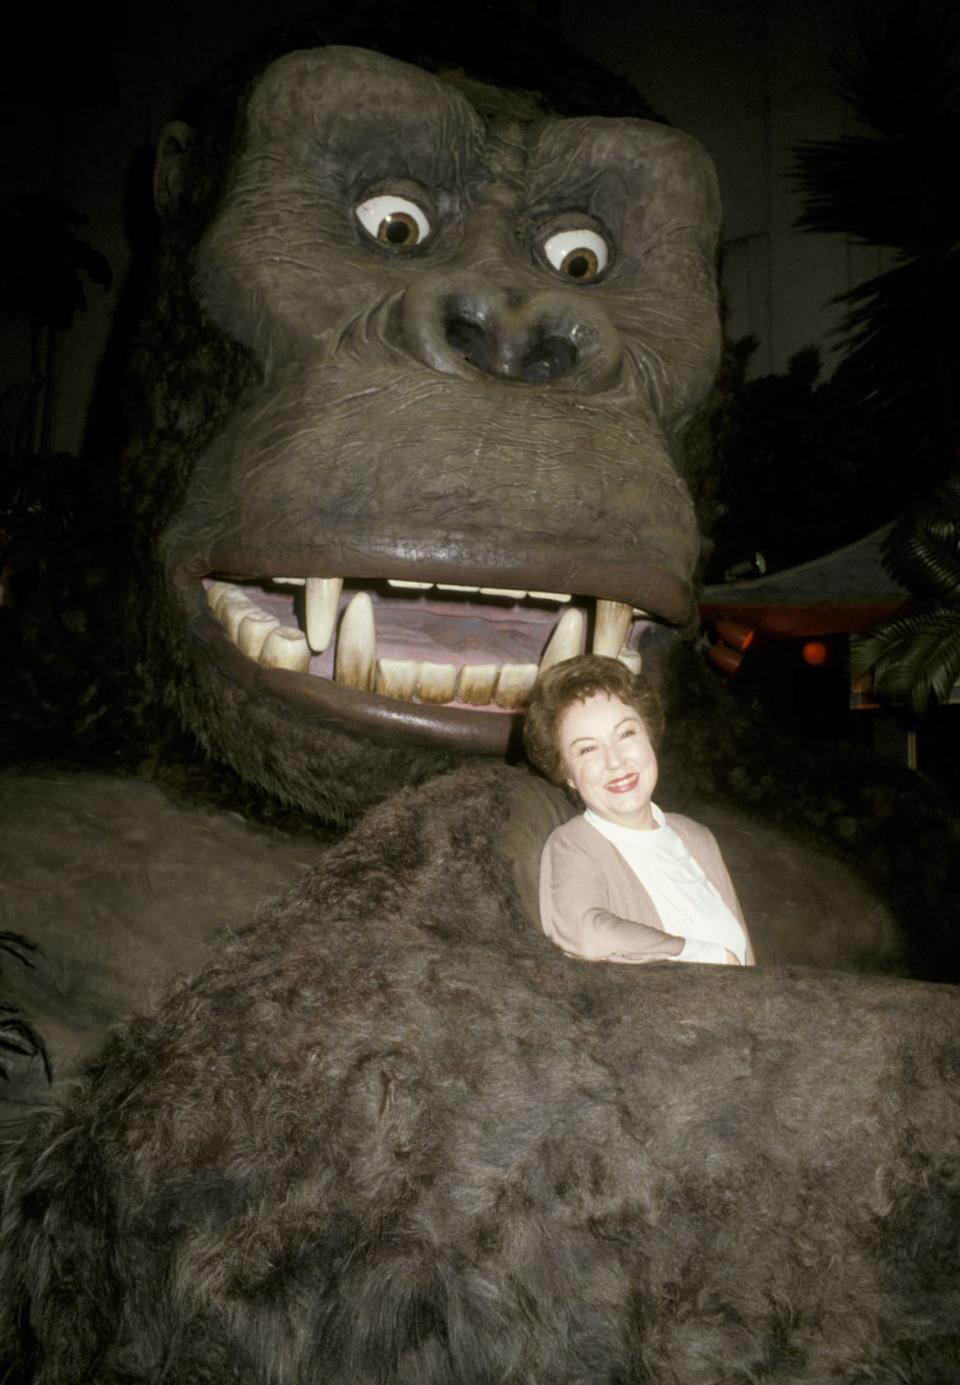 <div class="inline-image__caption"><p>Fay Wray and King Kong during 50th Anniversary of 'King Kong' at Mann's Chinese Theater in New York City, New York, United States. </p></div> <div class="inline-image__credit">Ron Galella/WireImage/Getty</div>